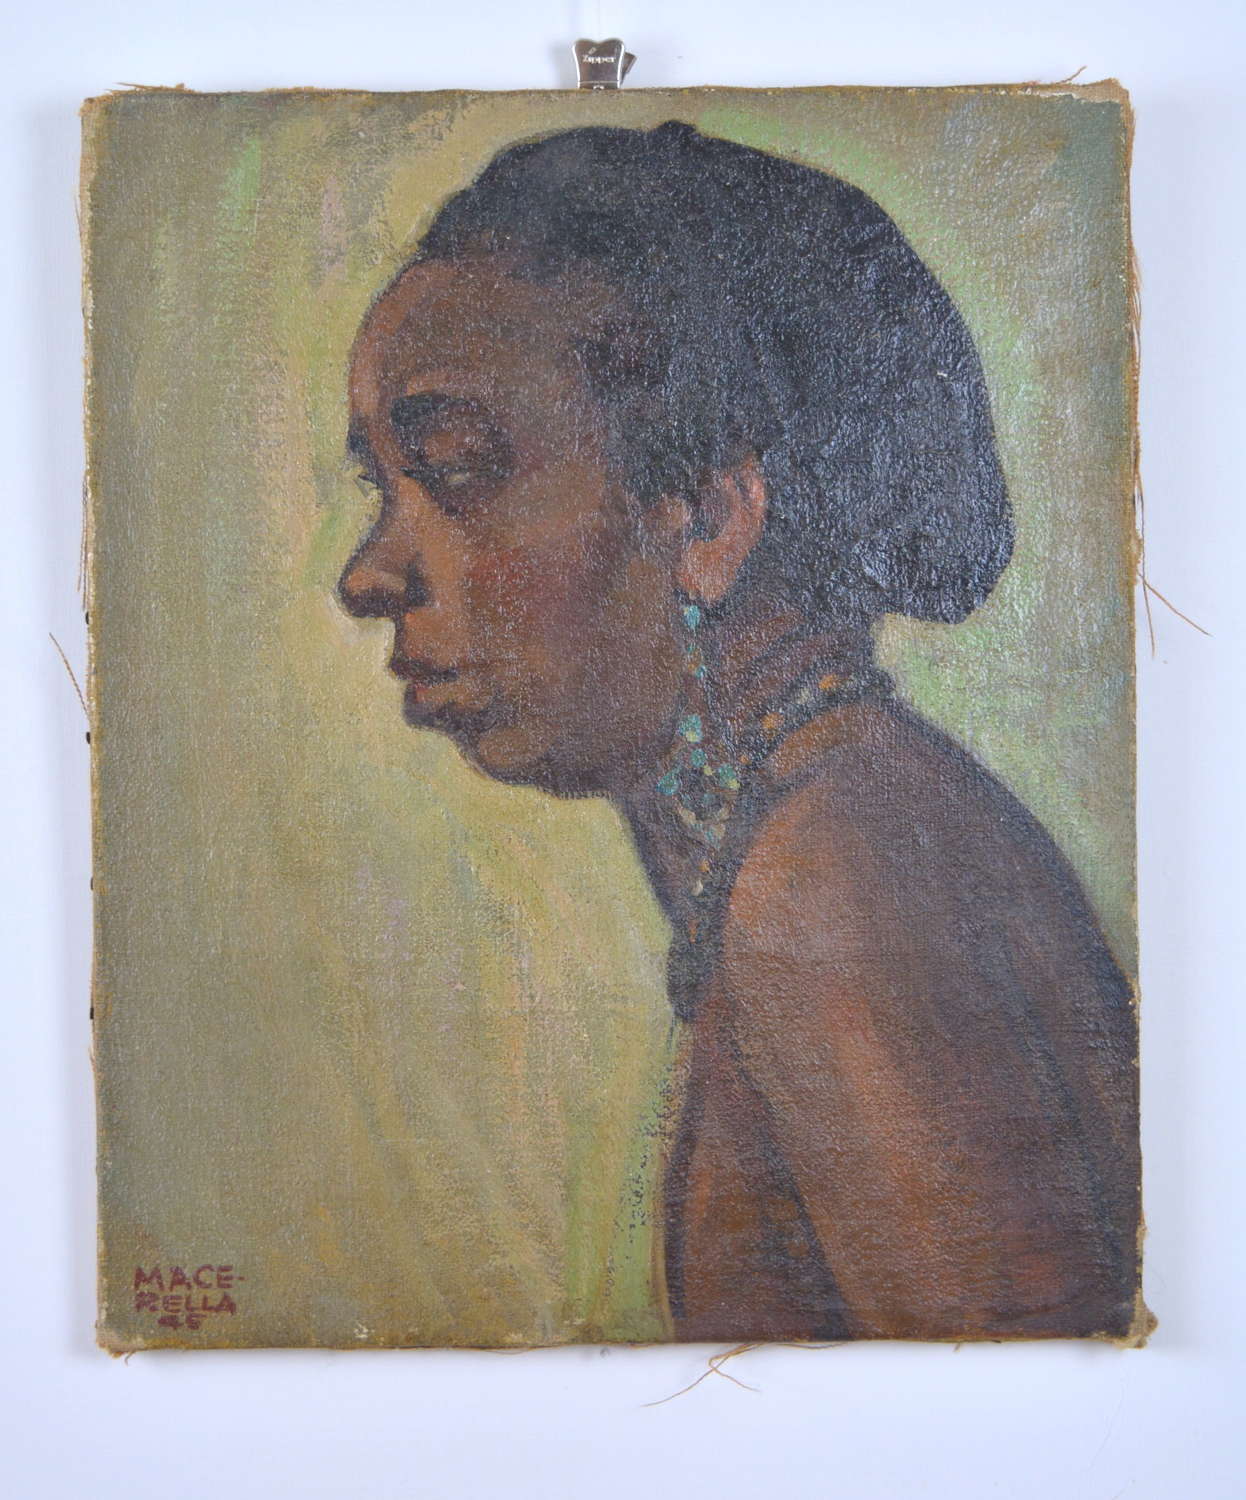 ERCOLE MACERELLA PORTRAIT OF AN AFRICAN WITH JEWELLERY